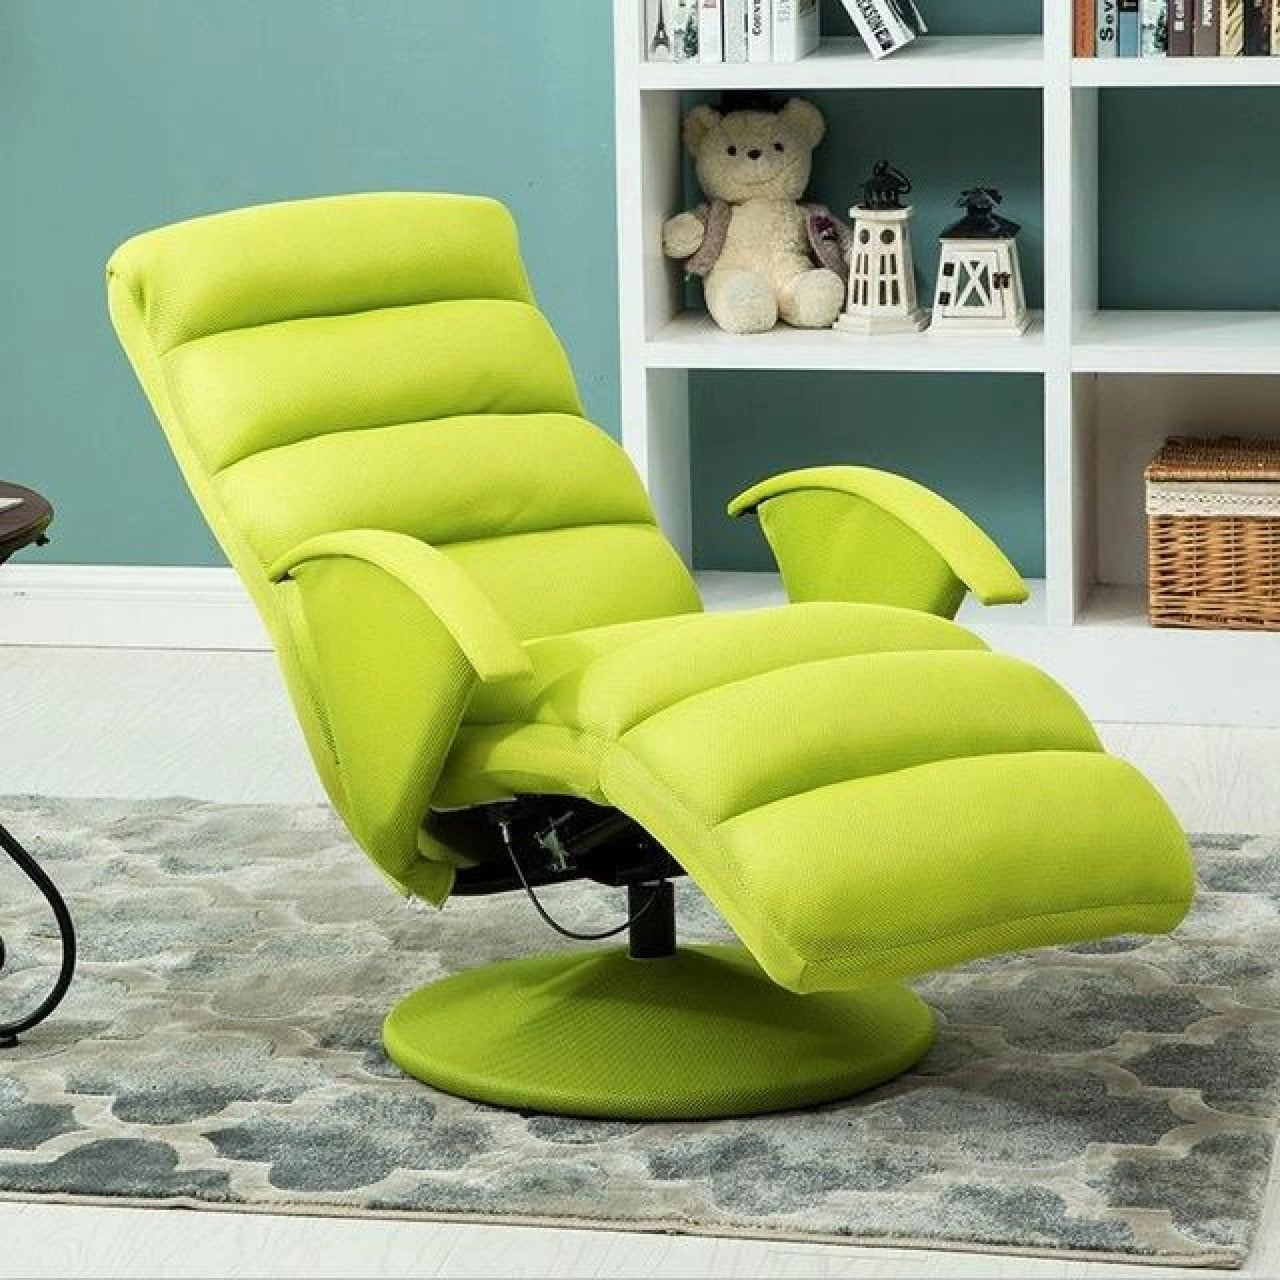 Rocking Chair: Leisure Rotating Comfort Multi Function Chair